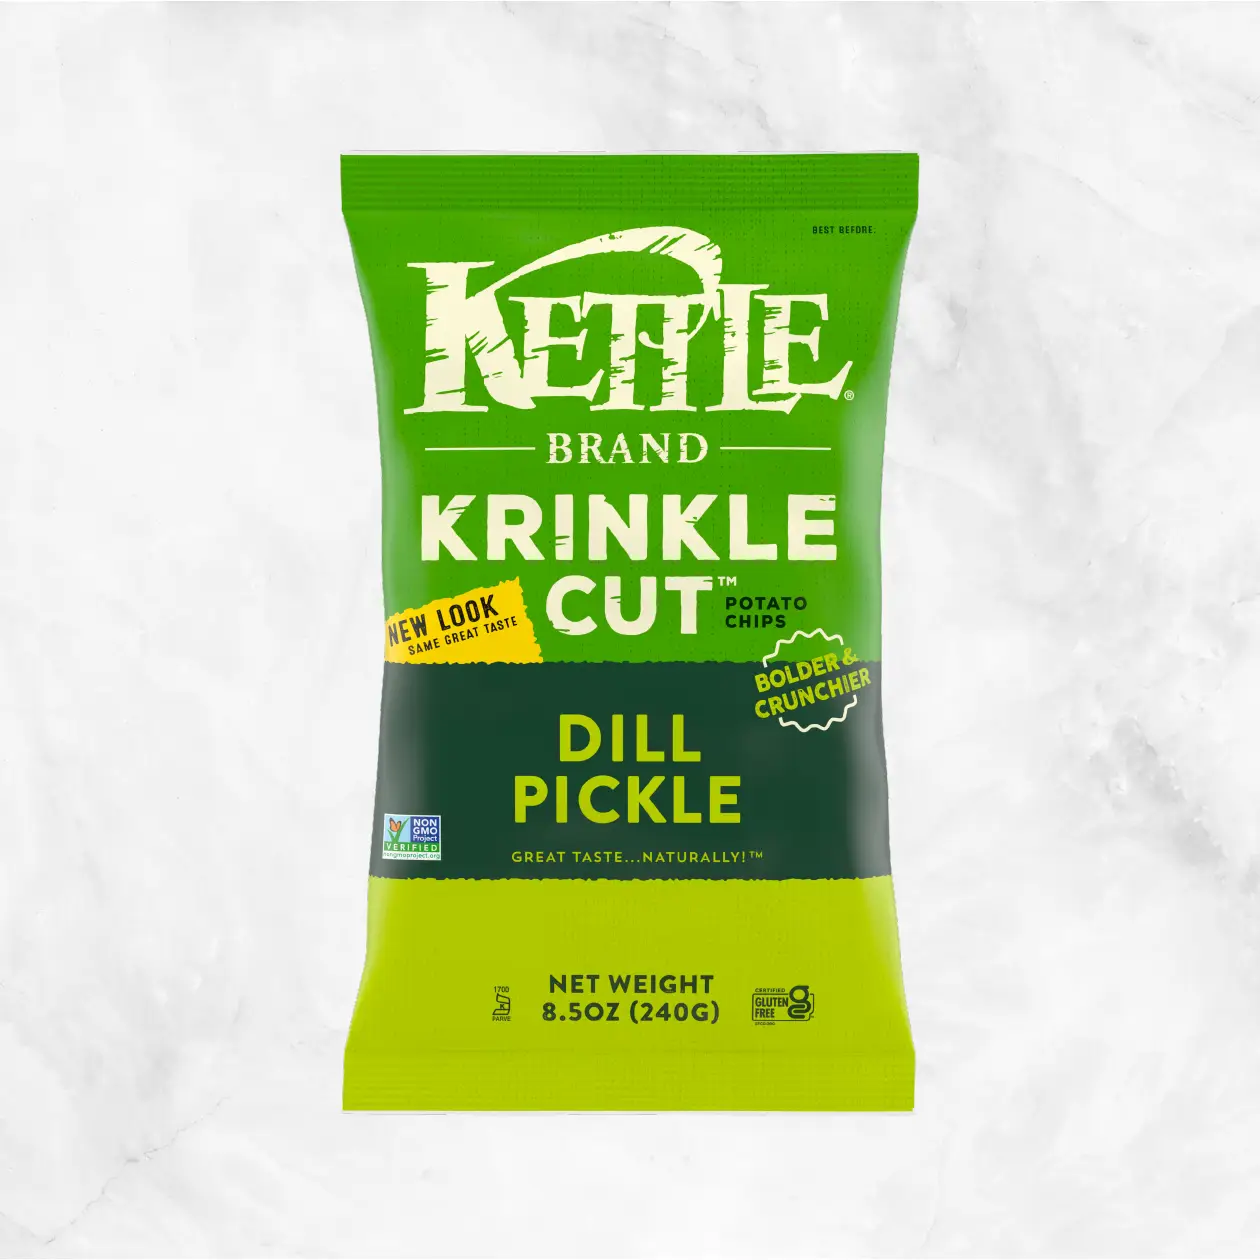 Krinkle Cut Dill Pickle Potato Chips Delivery